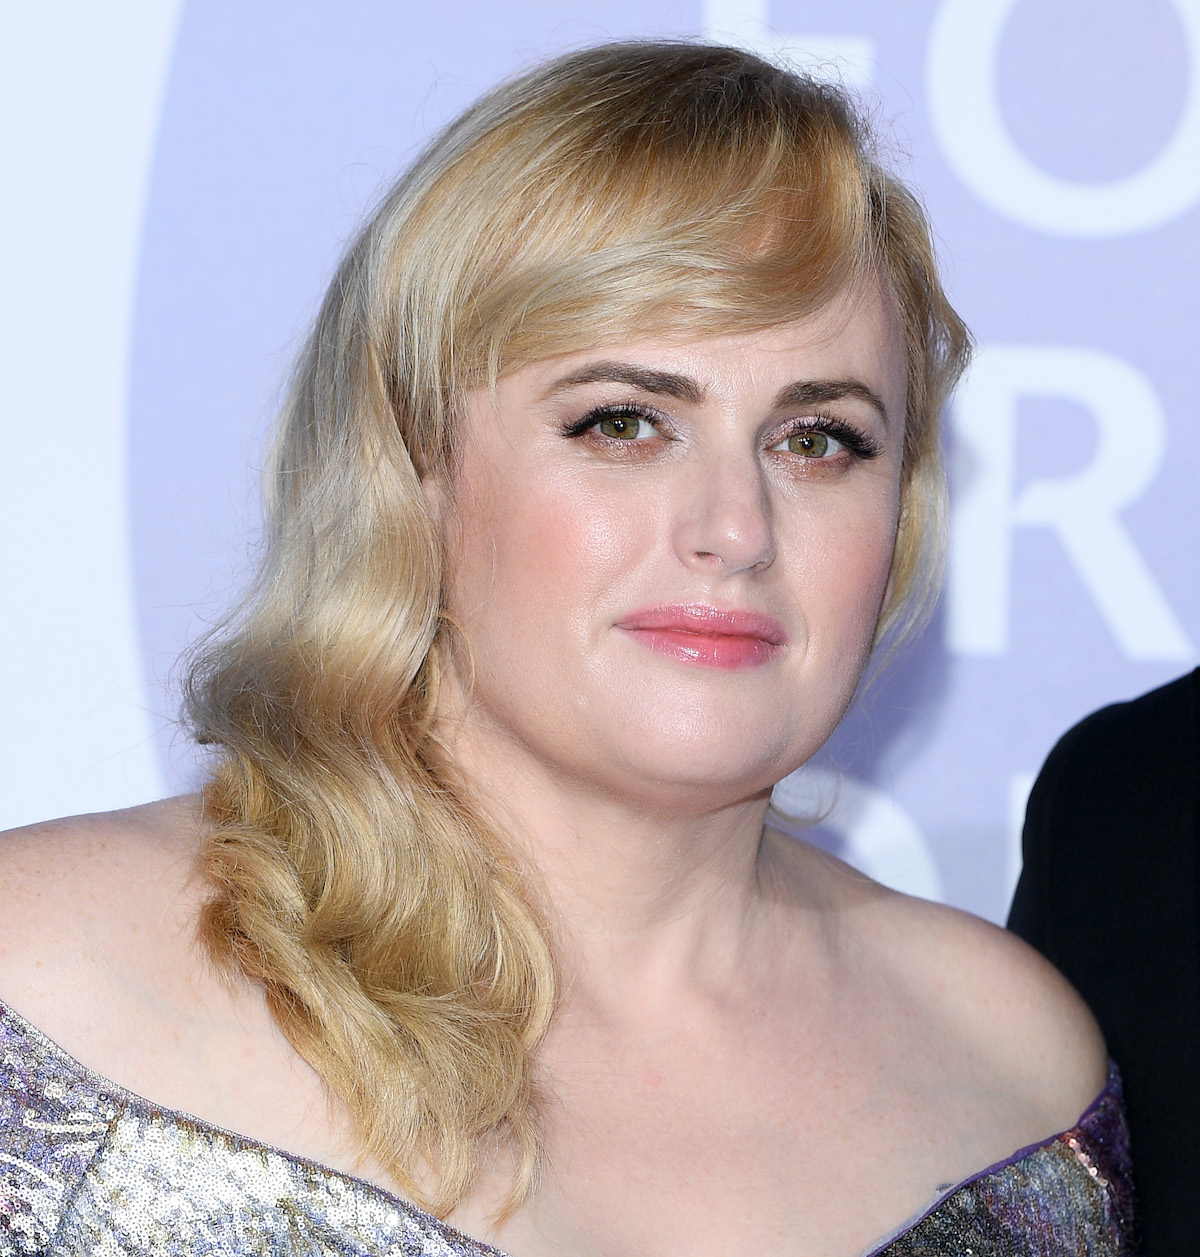 Rebel Wilson Opens up About 75-Pound Weight Loss in New Photo: “It’s ...